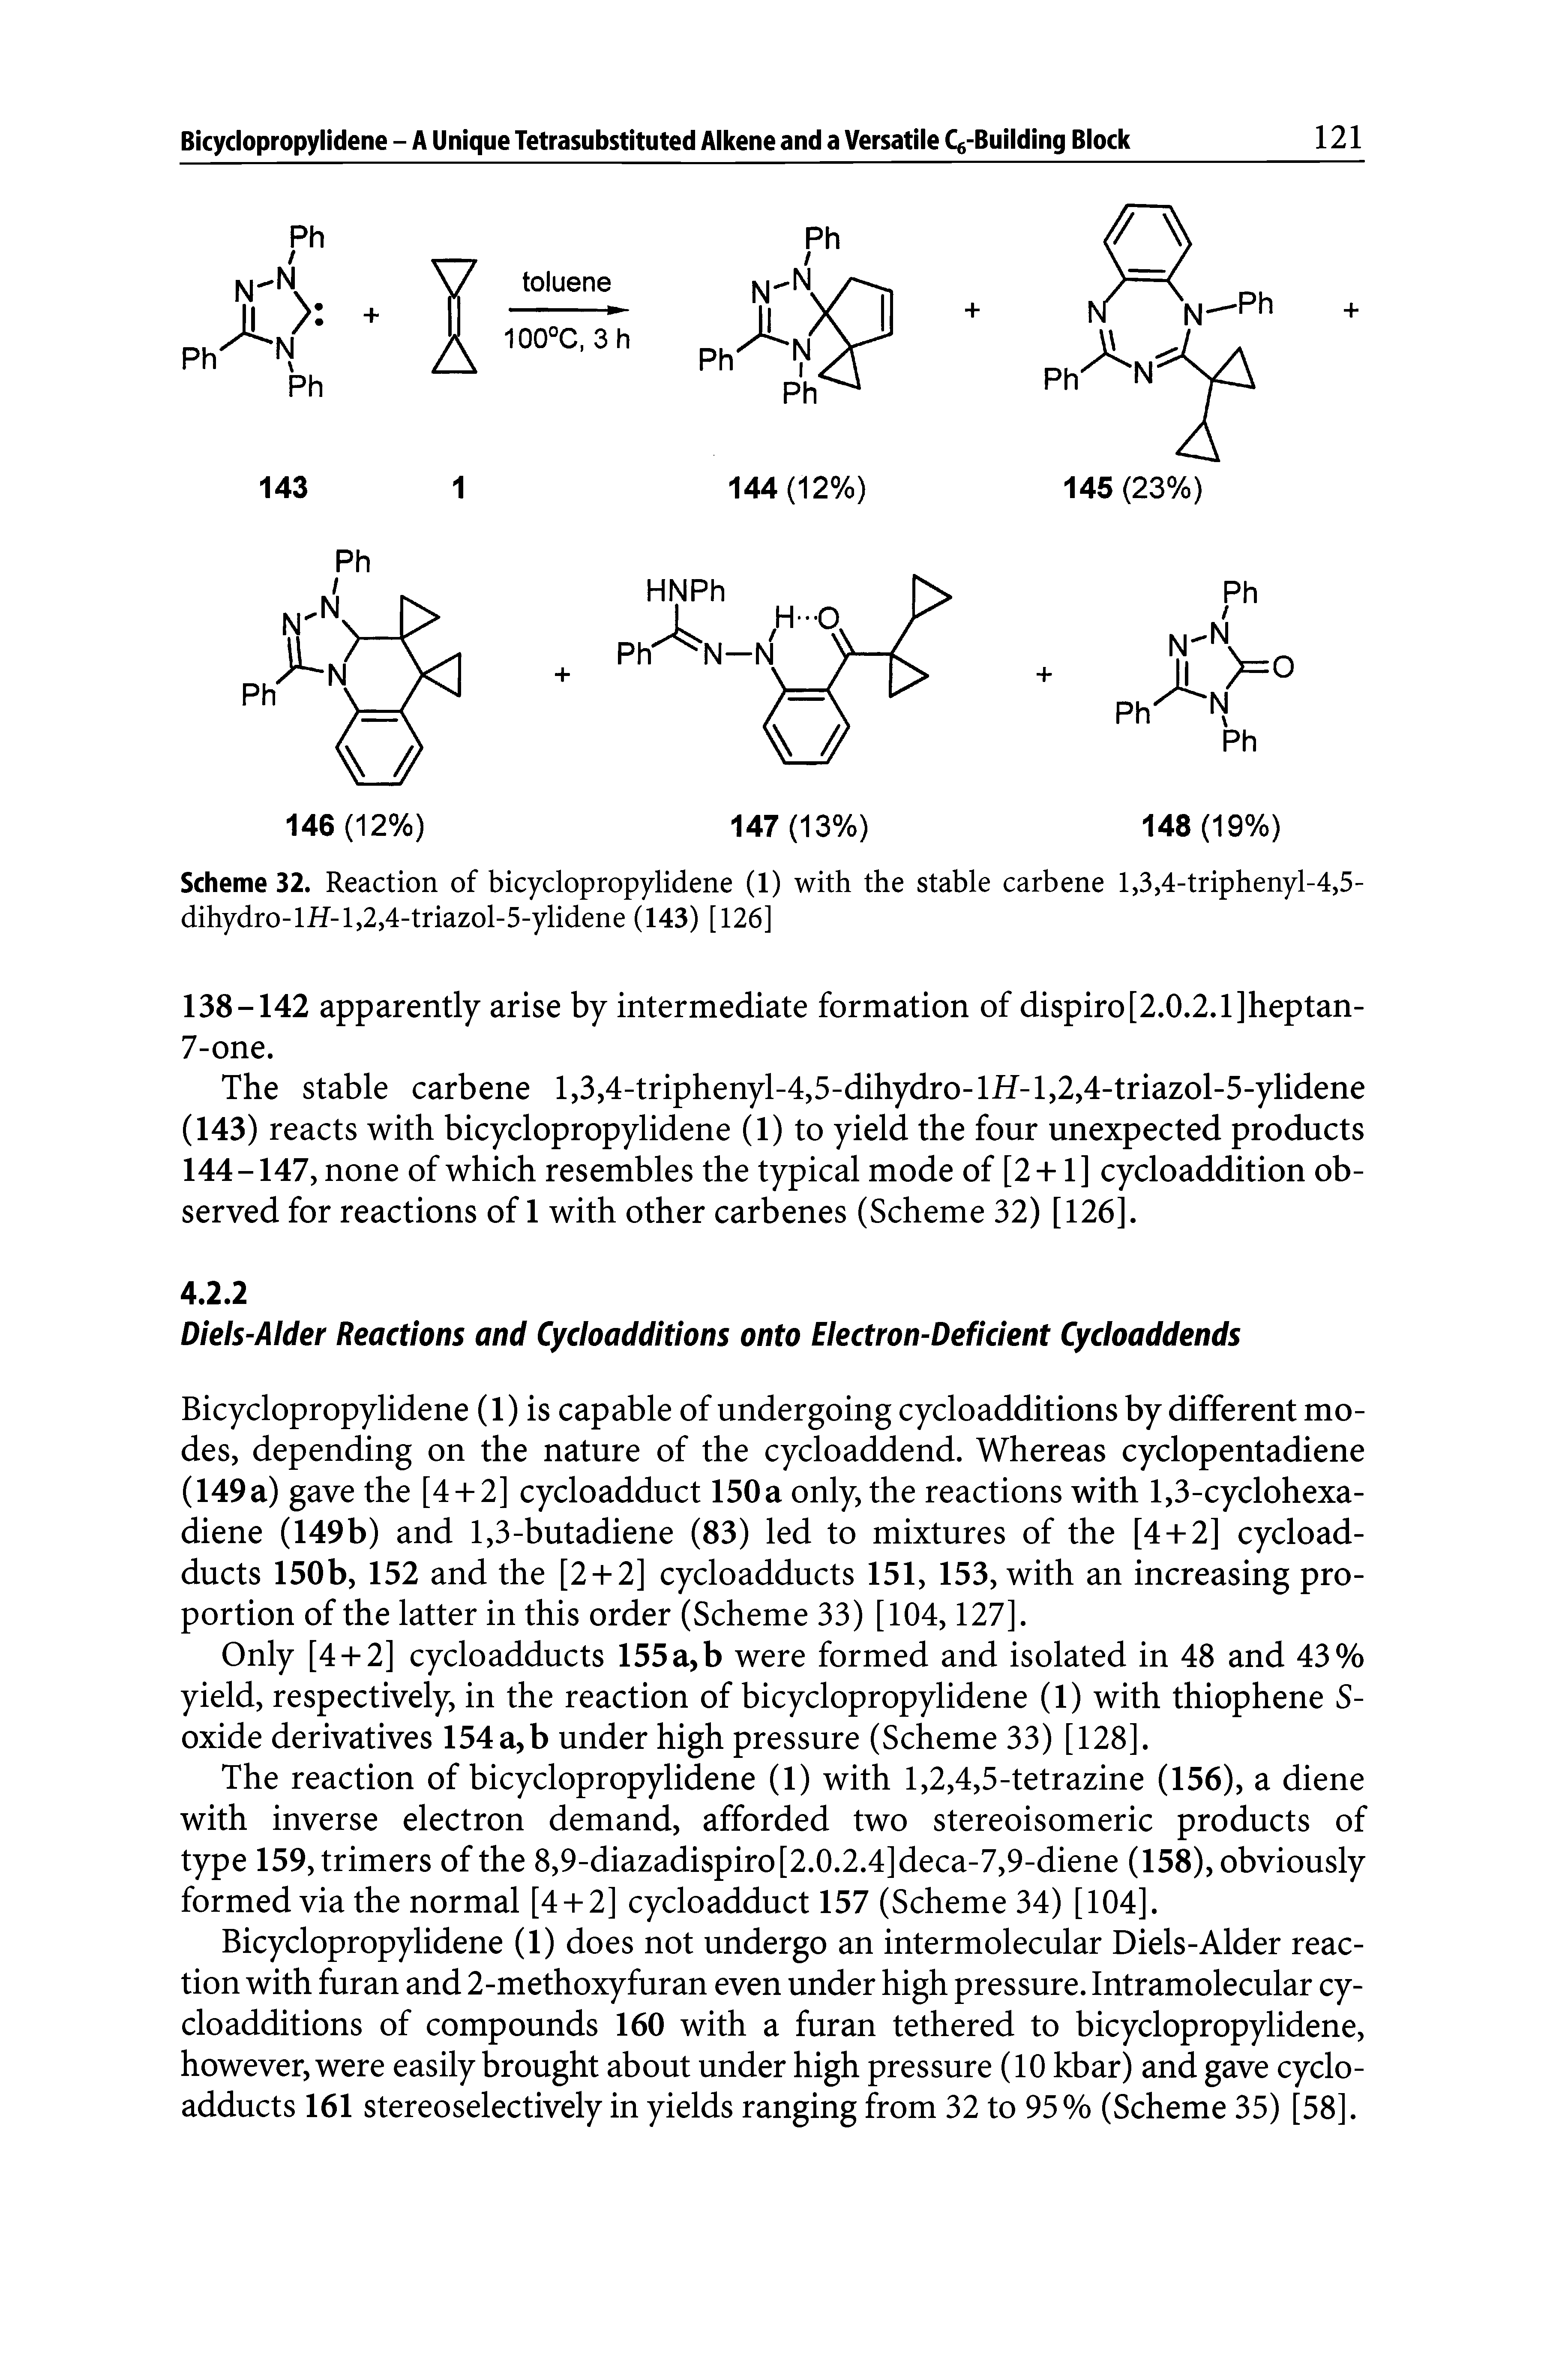 Scheme 32. Reaction of bicyclopropylidene (1) with the stable carbene l,3,4-triphenyl-4,5-dihydro-lH-l,2,4-triazol-5-ylidene (143) [126]...